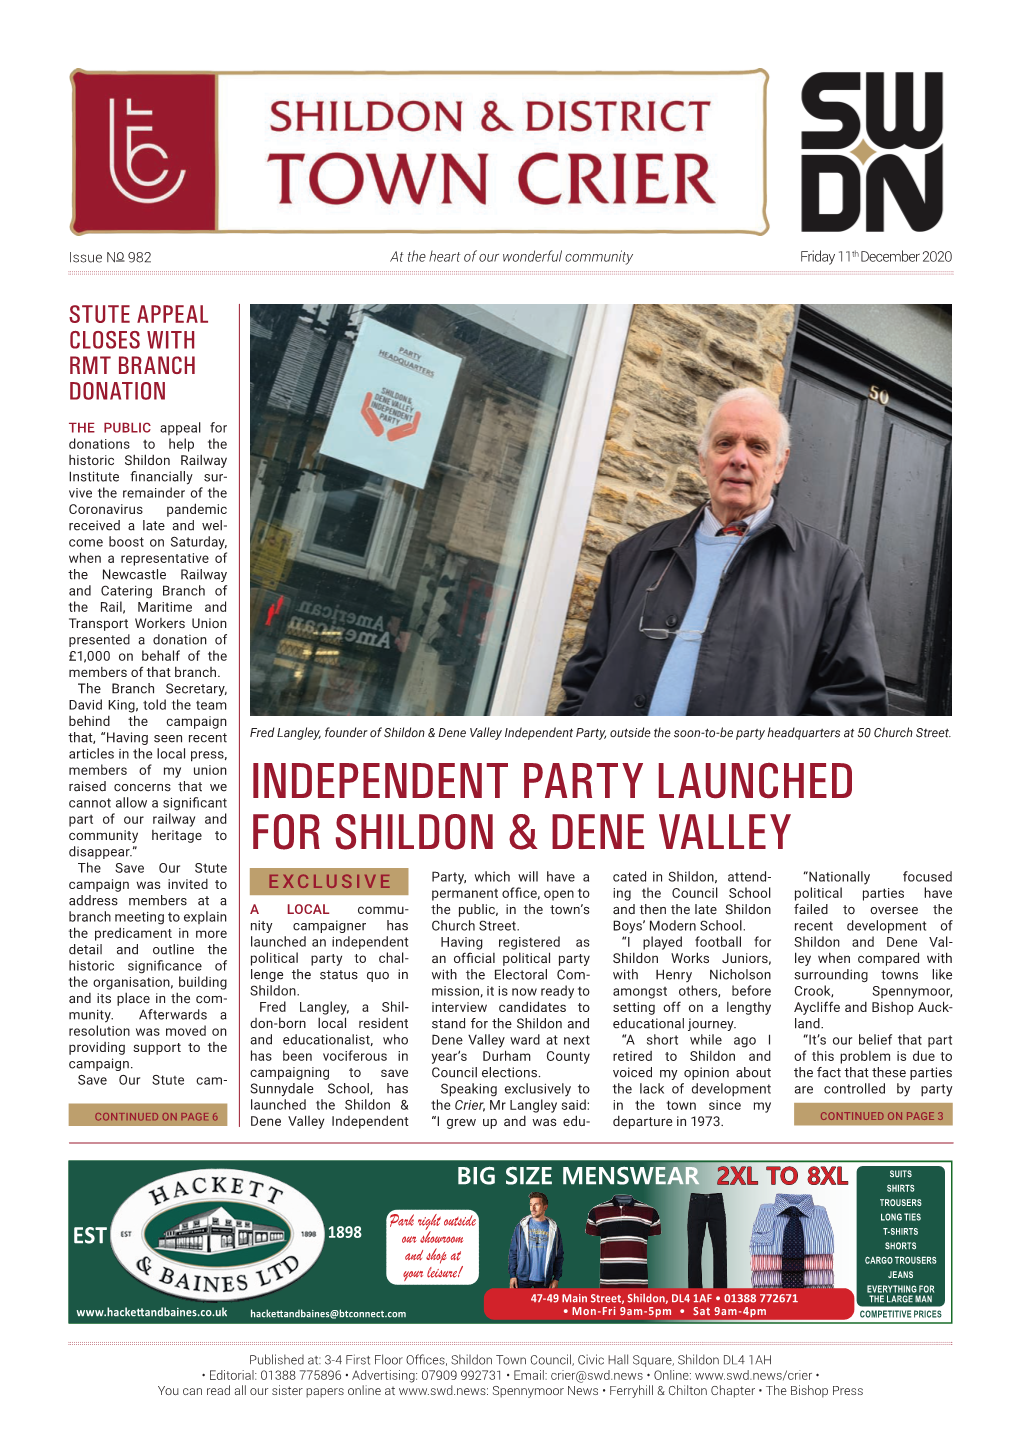 Independent Party Launched for Shildon & Dene Valley